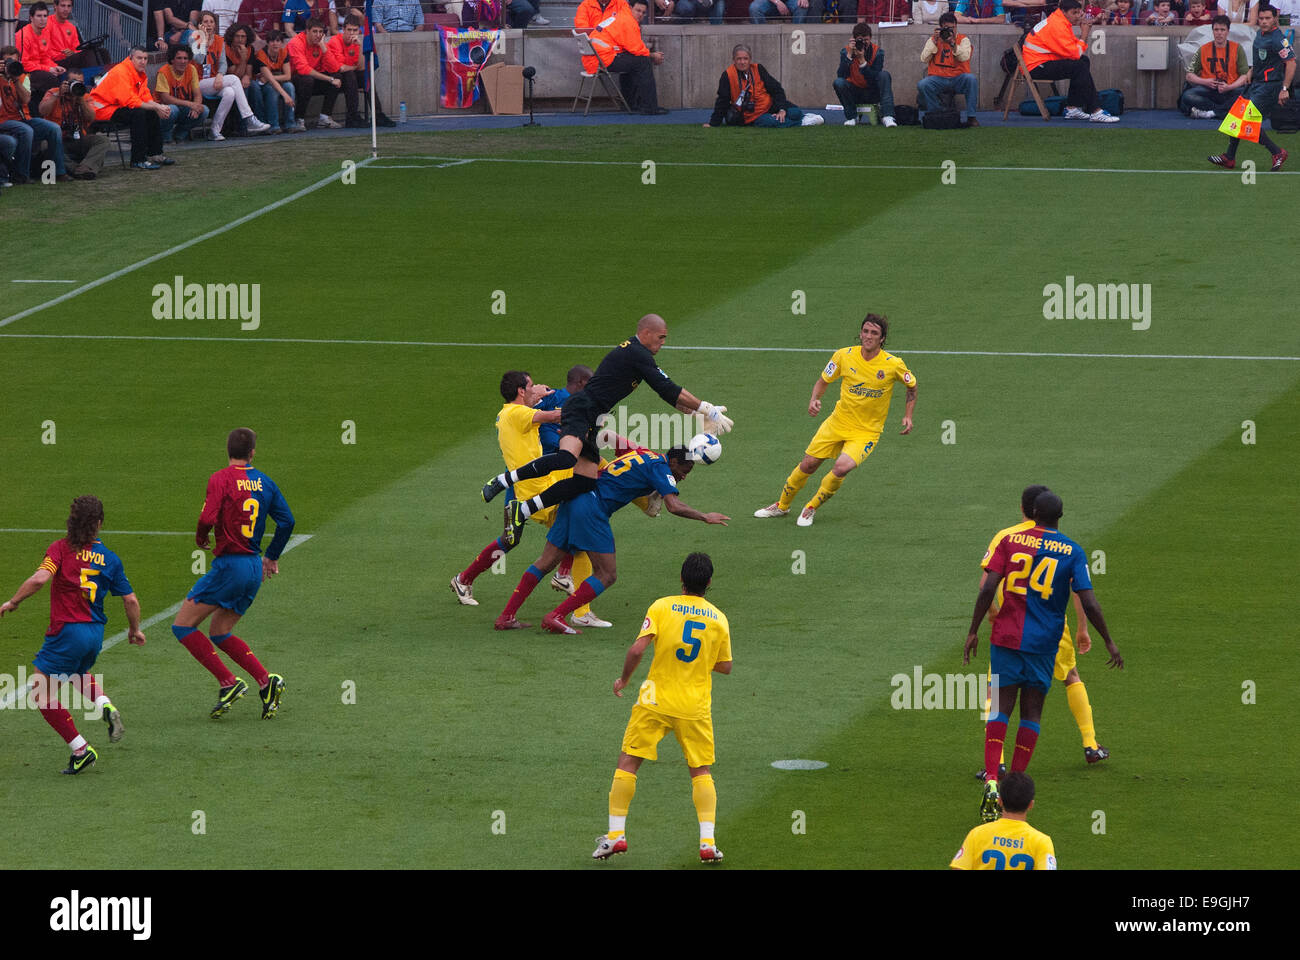 BARCELONA - MAY 9: The goalkeeper catches the ball on May 9, 2009 in Barcelona, Spain. F.C Barcelona against Villarreal. Stock Photo